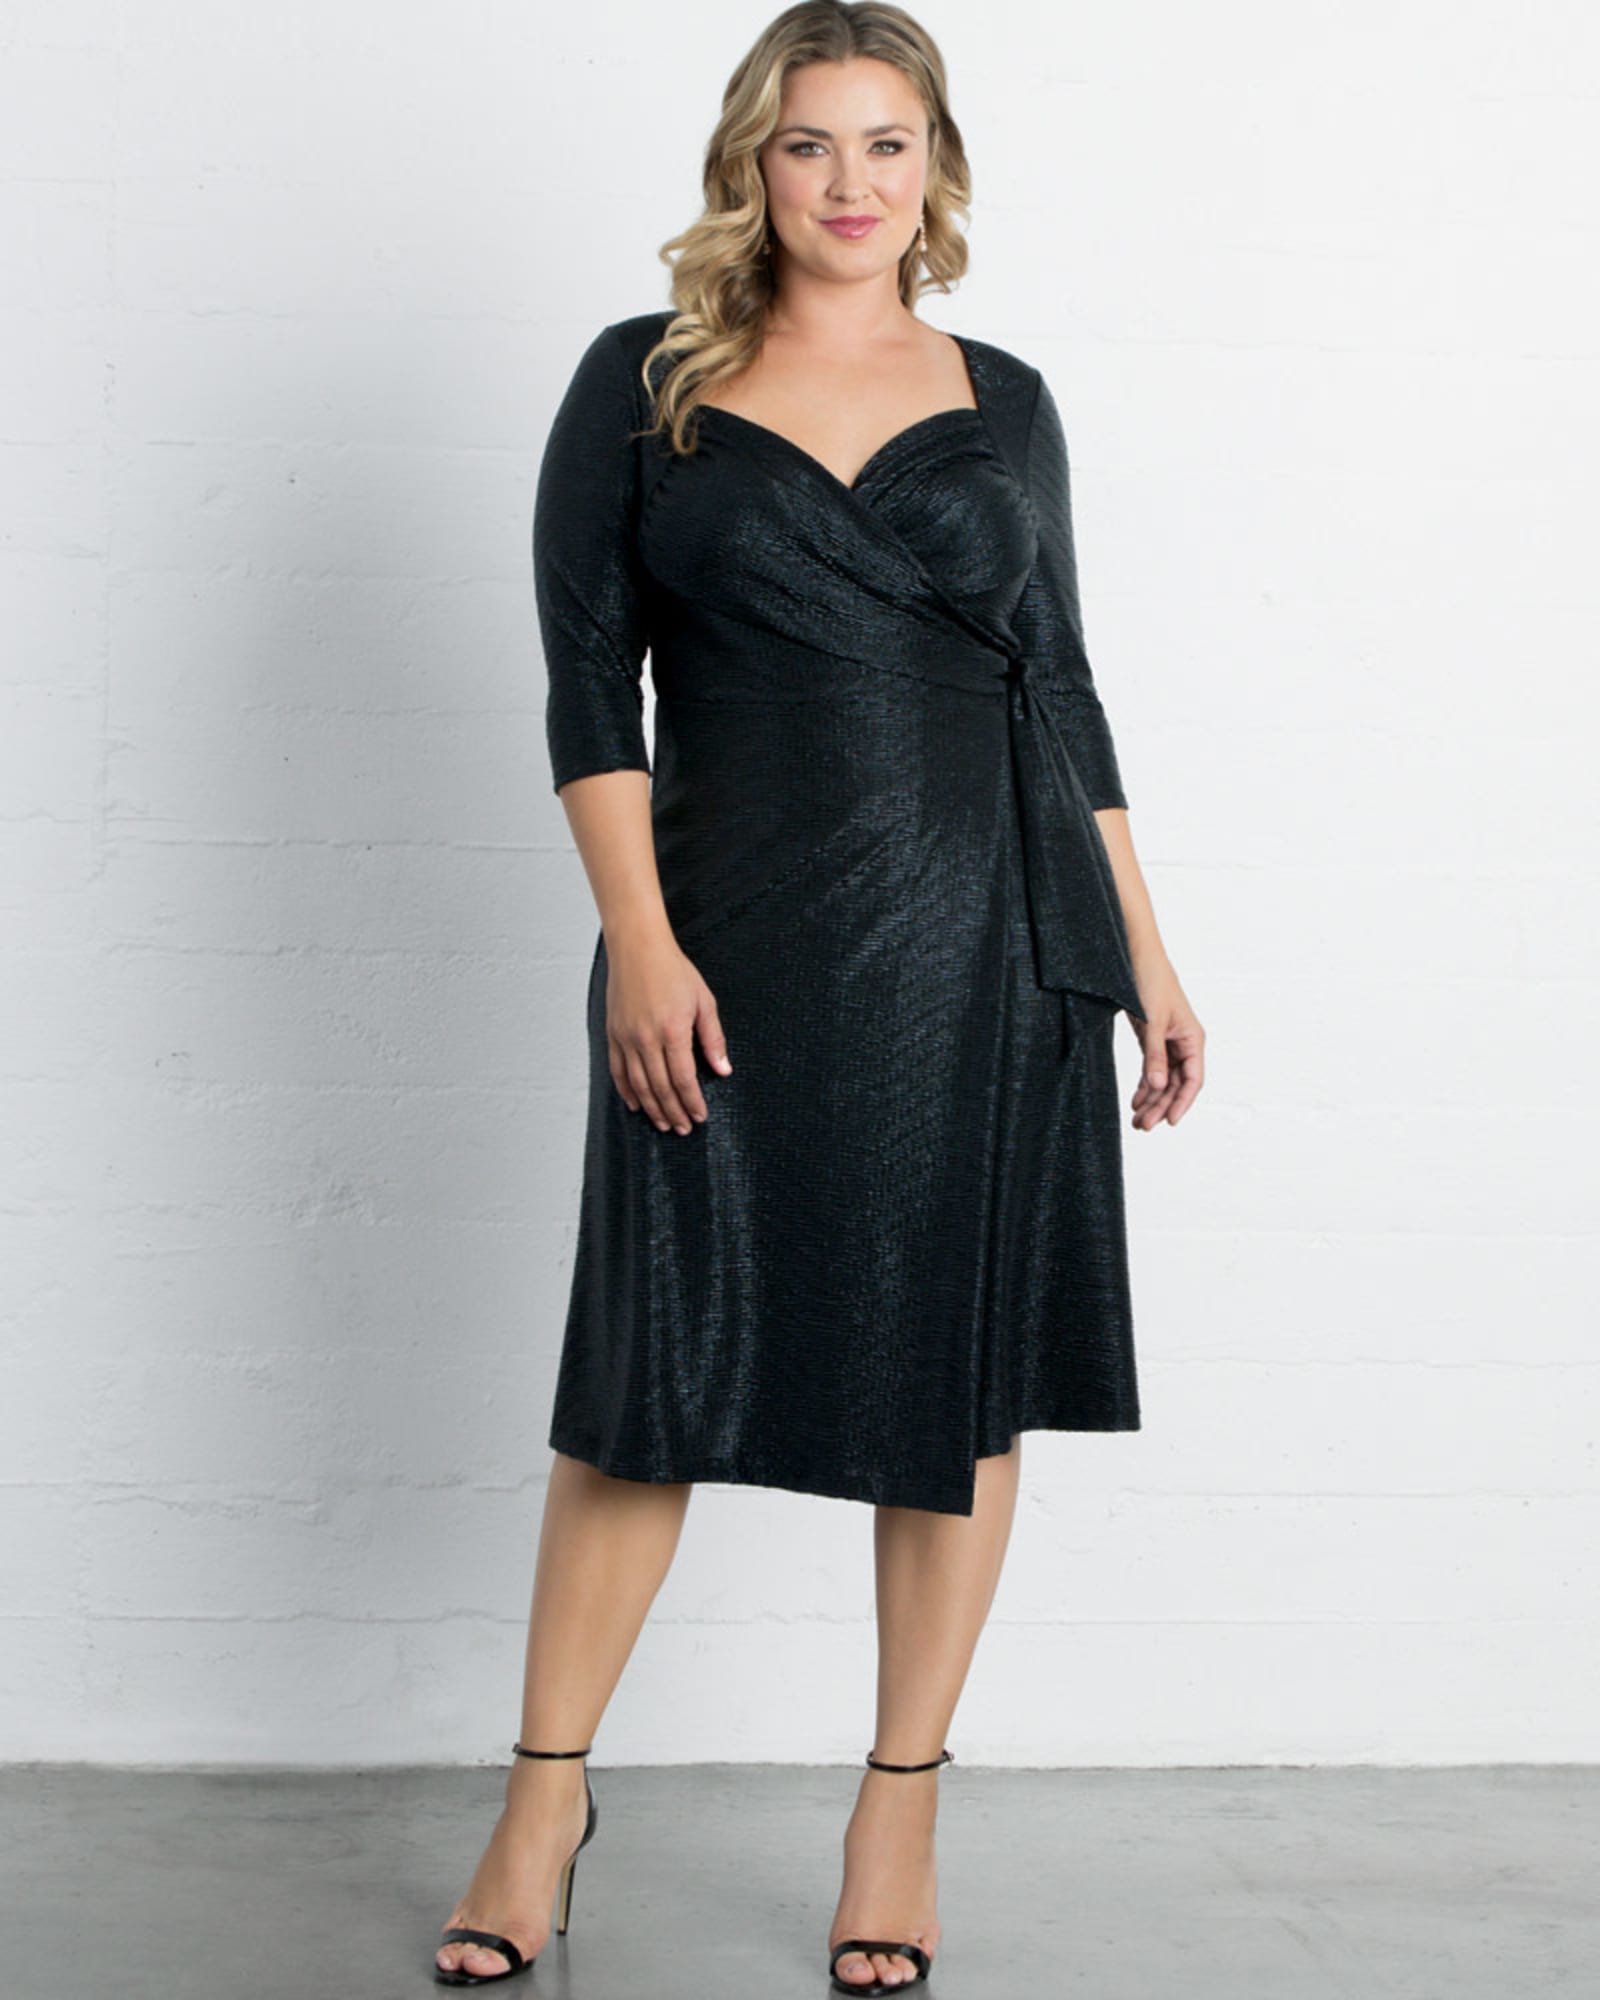 The Dressed-Down Satin Slip Dress — Typical BlaQueen